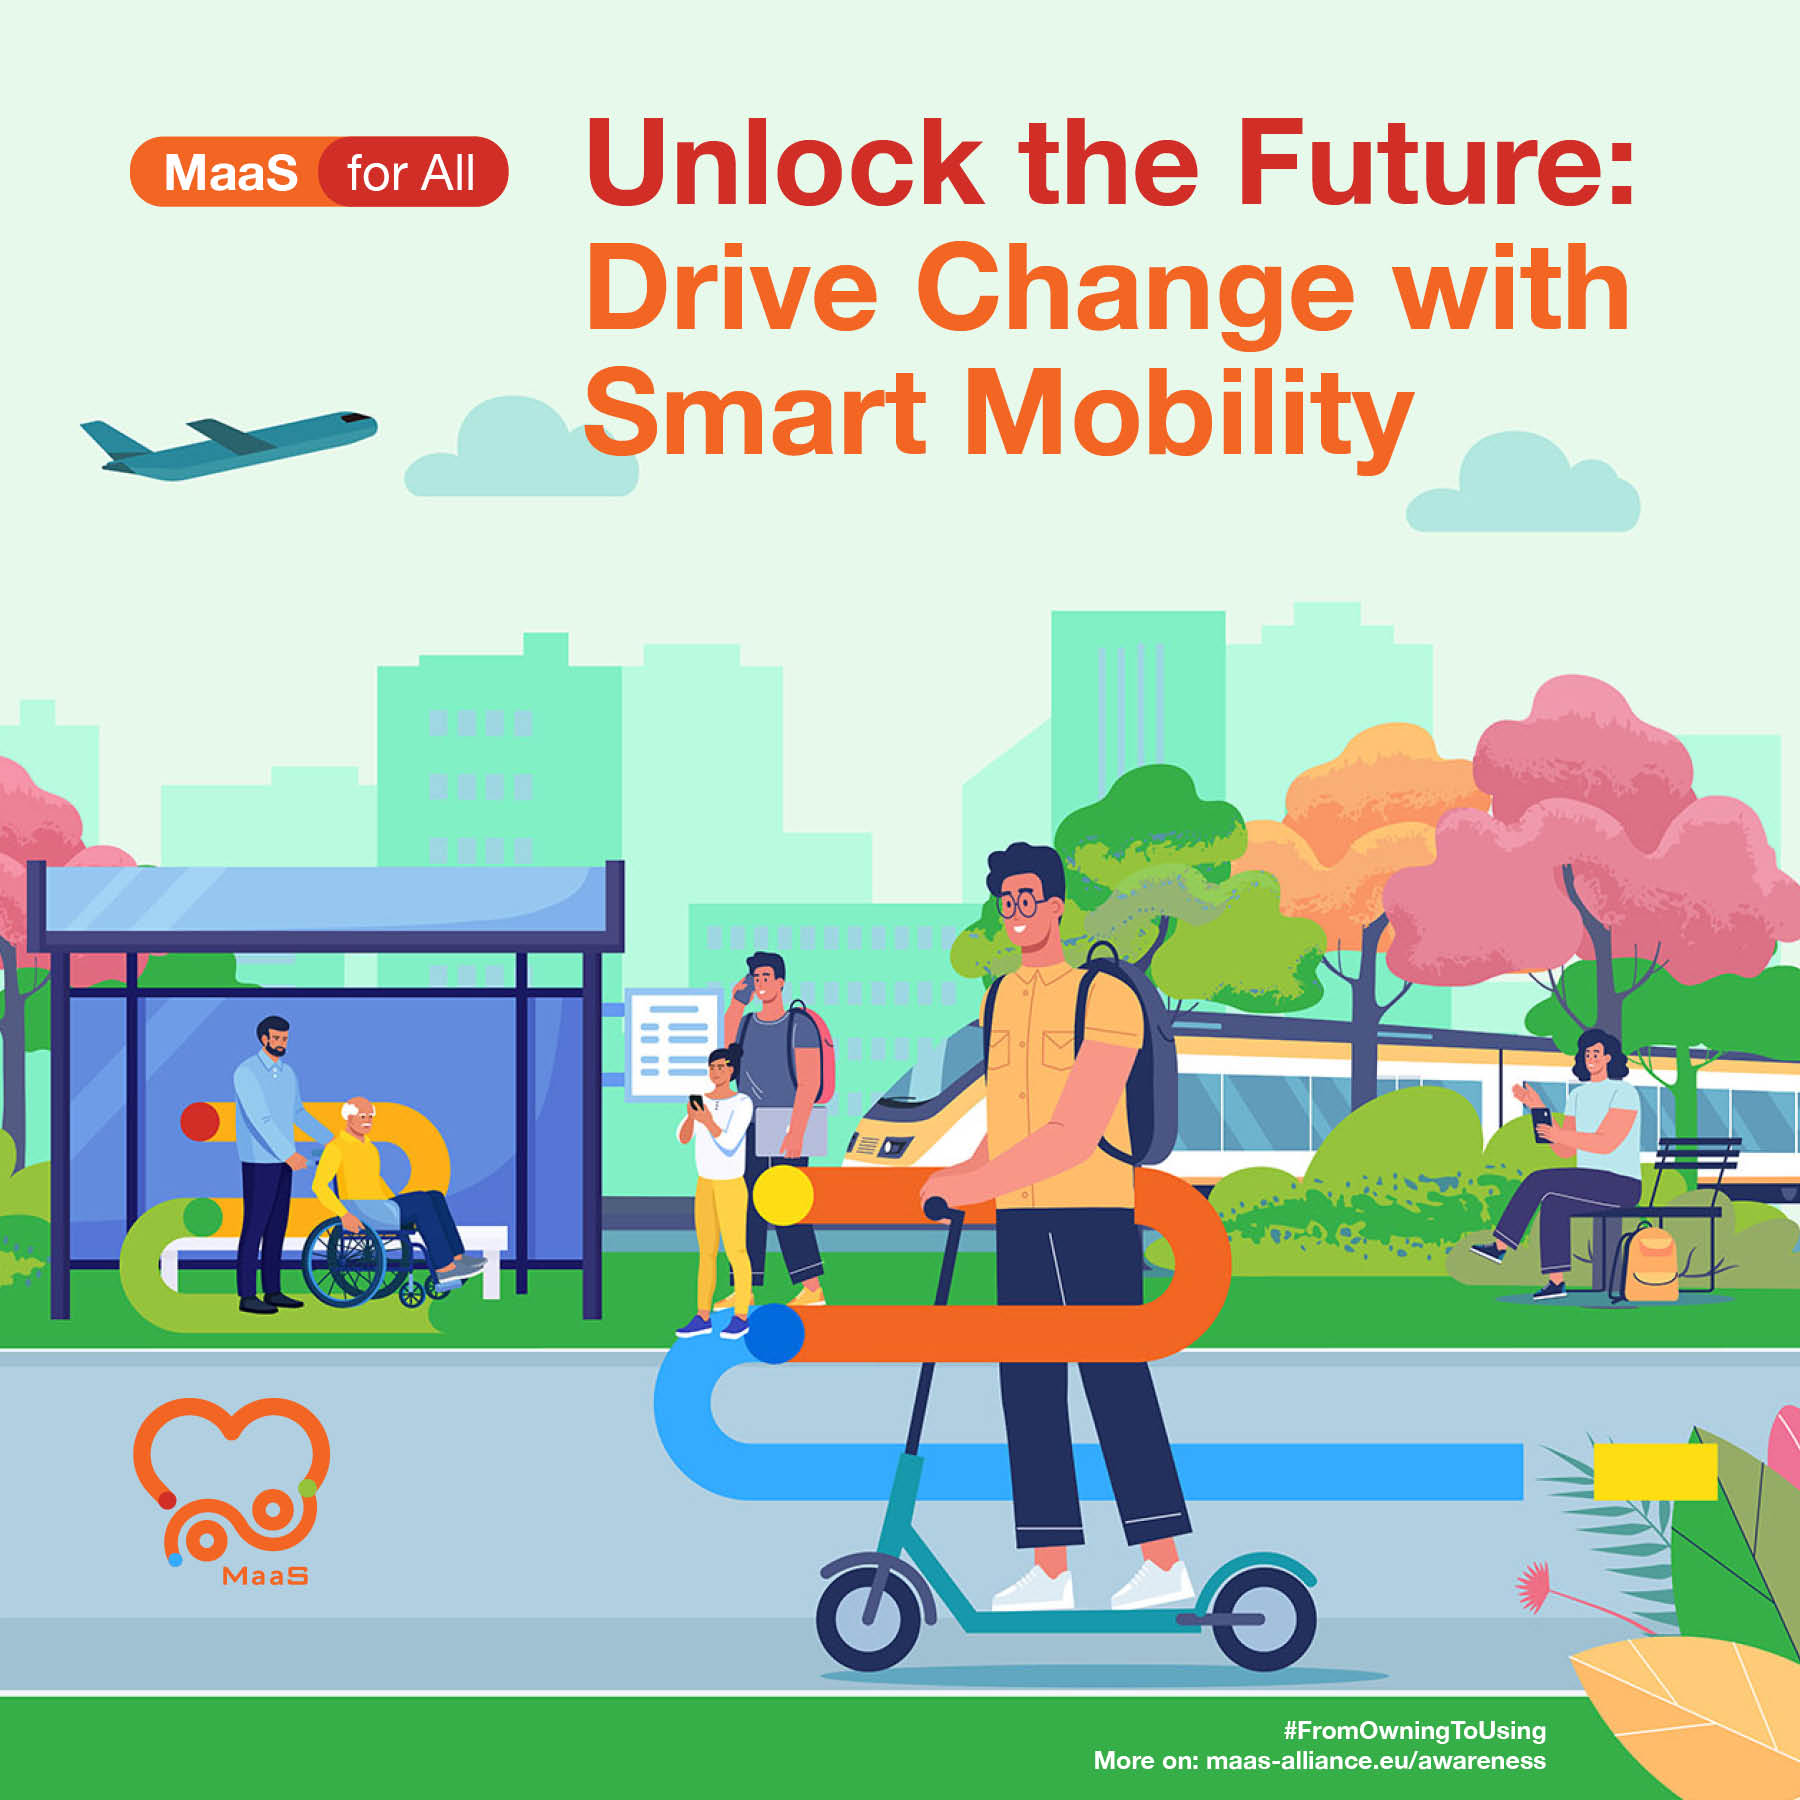 MaaS Alliance Awareness Campaign - Unlock the Future: Drive Change with Smart Mobility